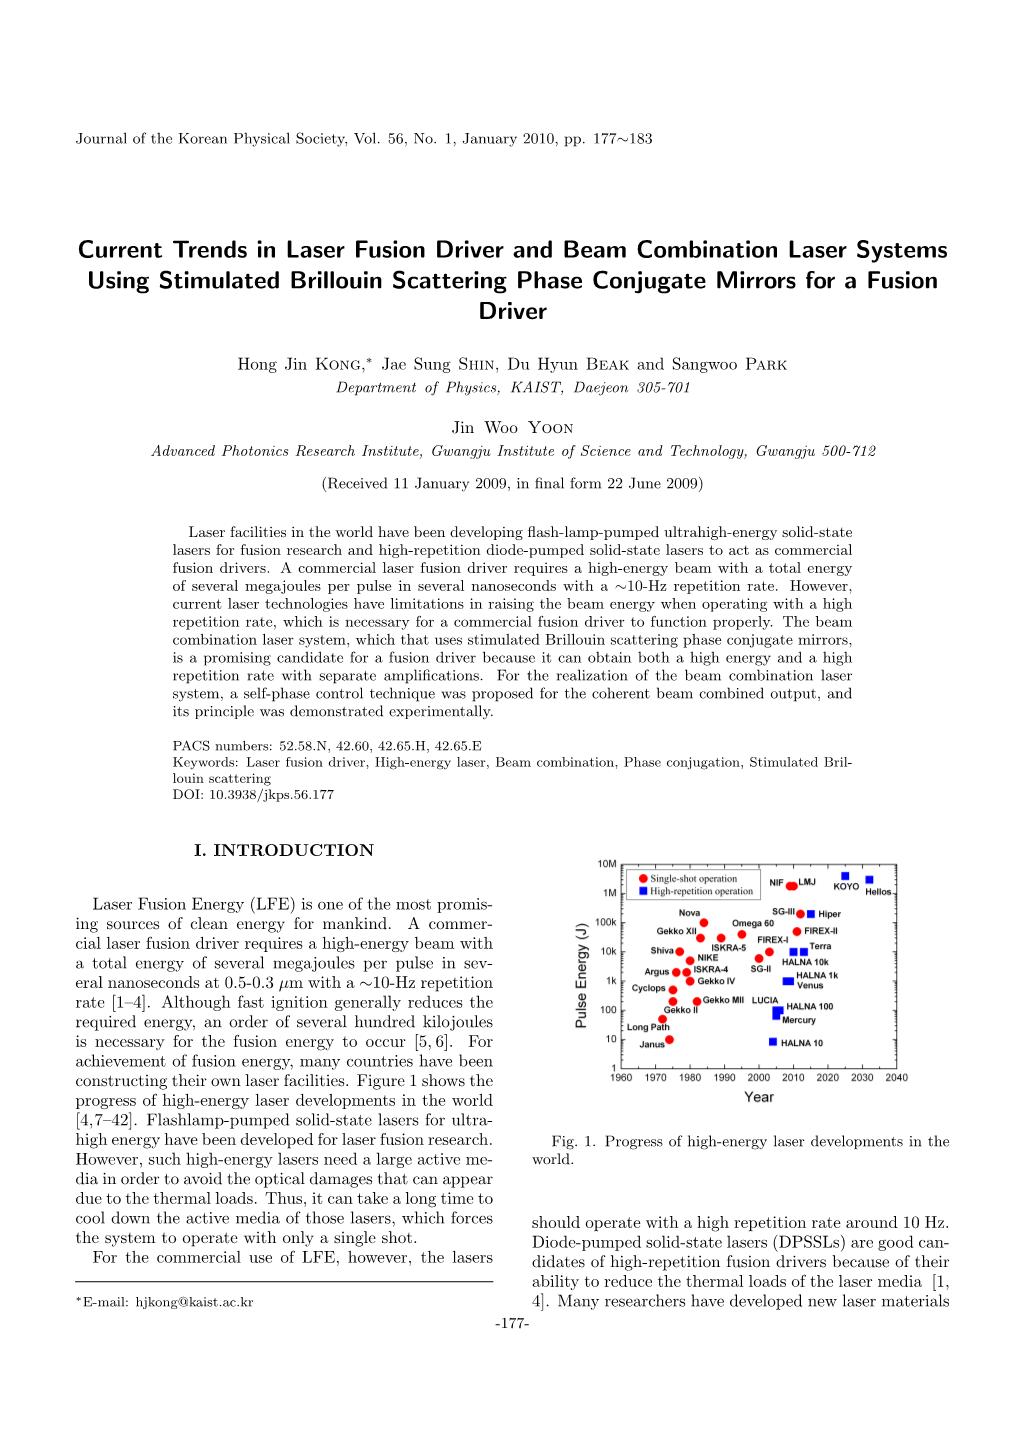 Current Trends in Laser Fusion Driver and Beam Combination Laser Systems Using Stimulated Brillouin Scattering Phase Conjugate Mirrors for a Fusion Driver